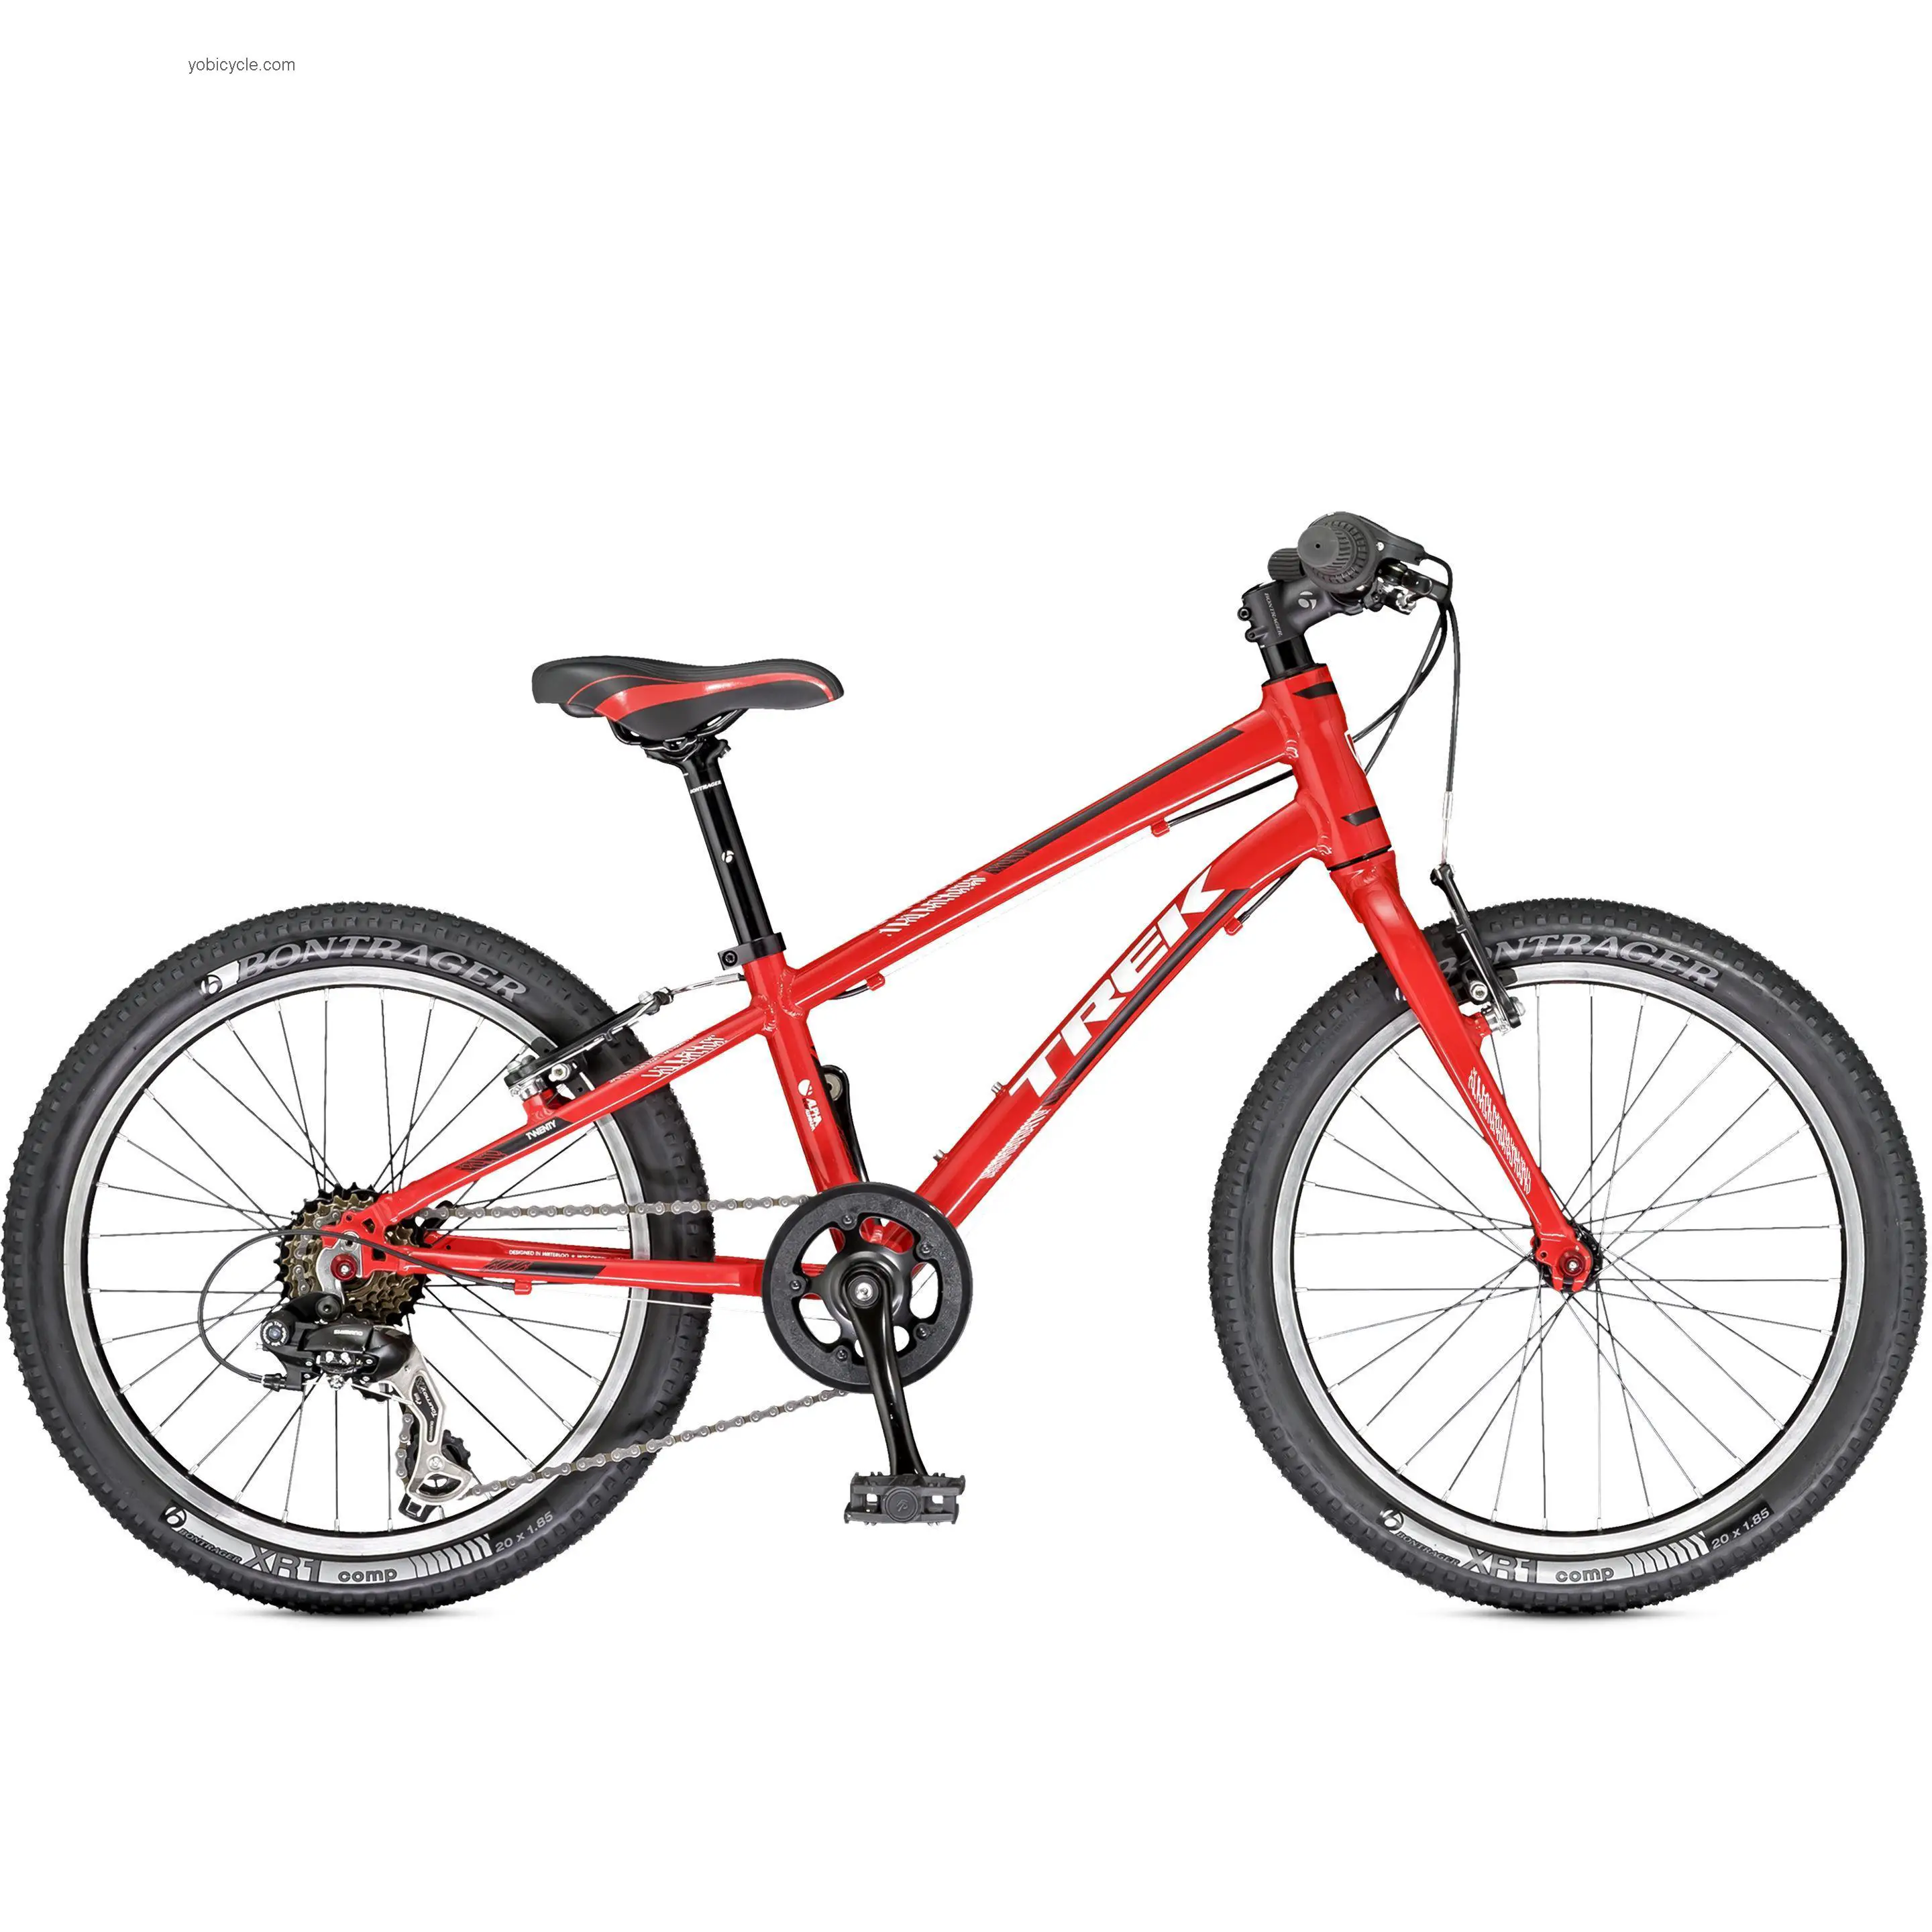 Trek Superfly 20 2014 comparison online with competitors